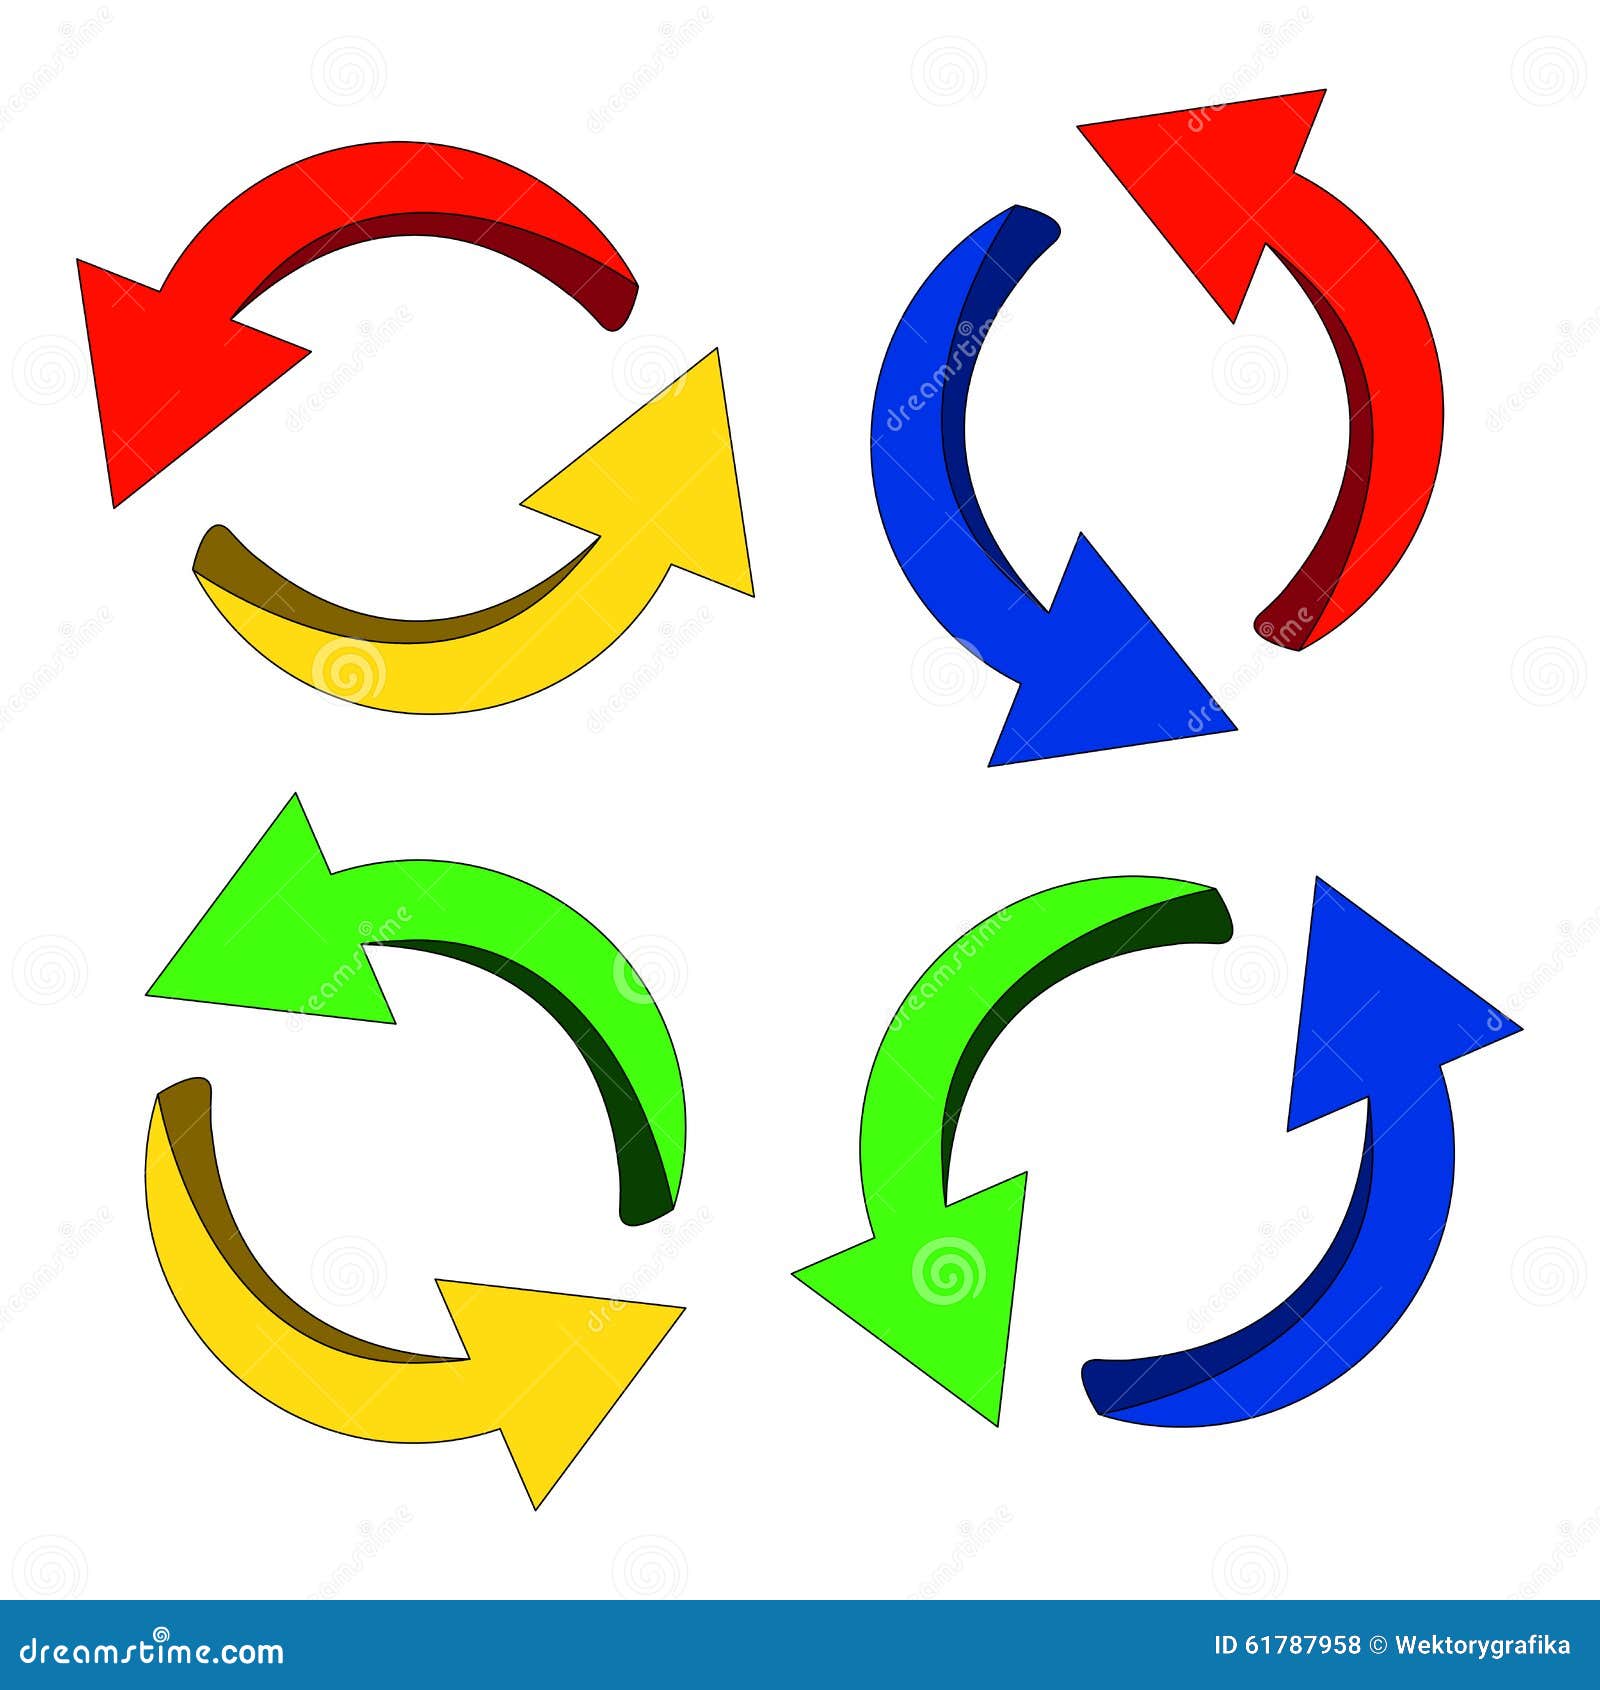 clip art business cycle - photo #32